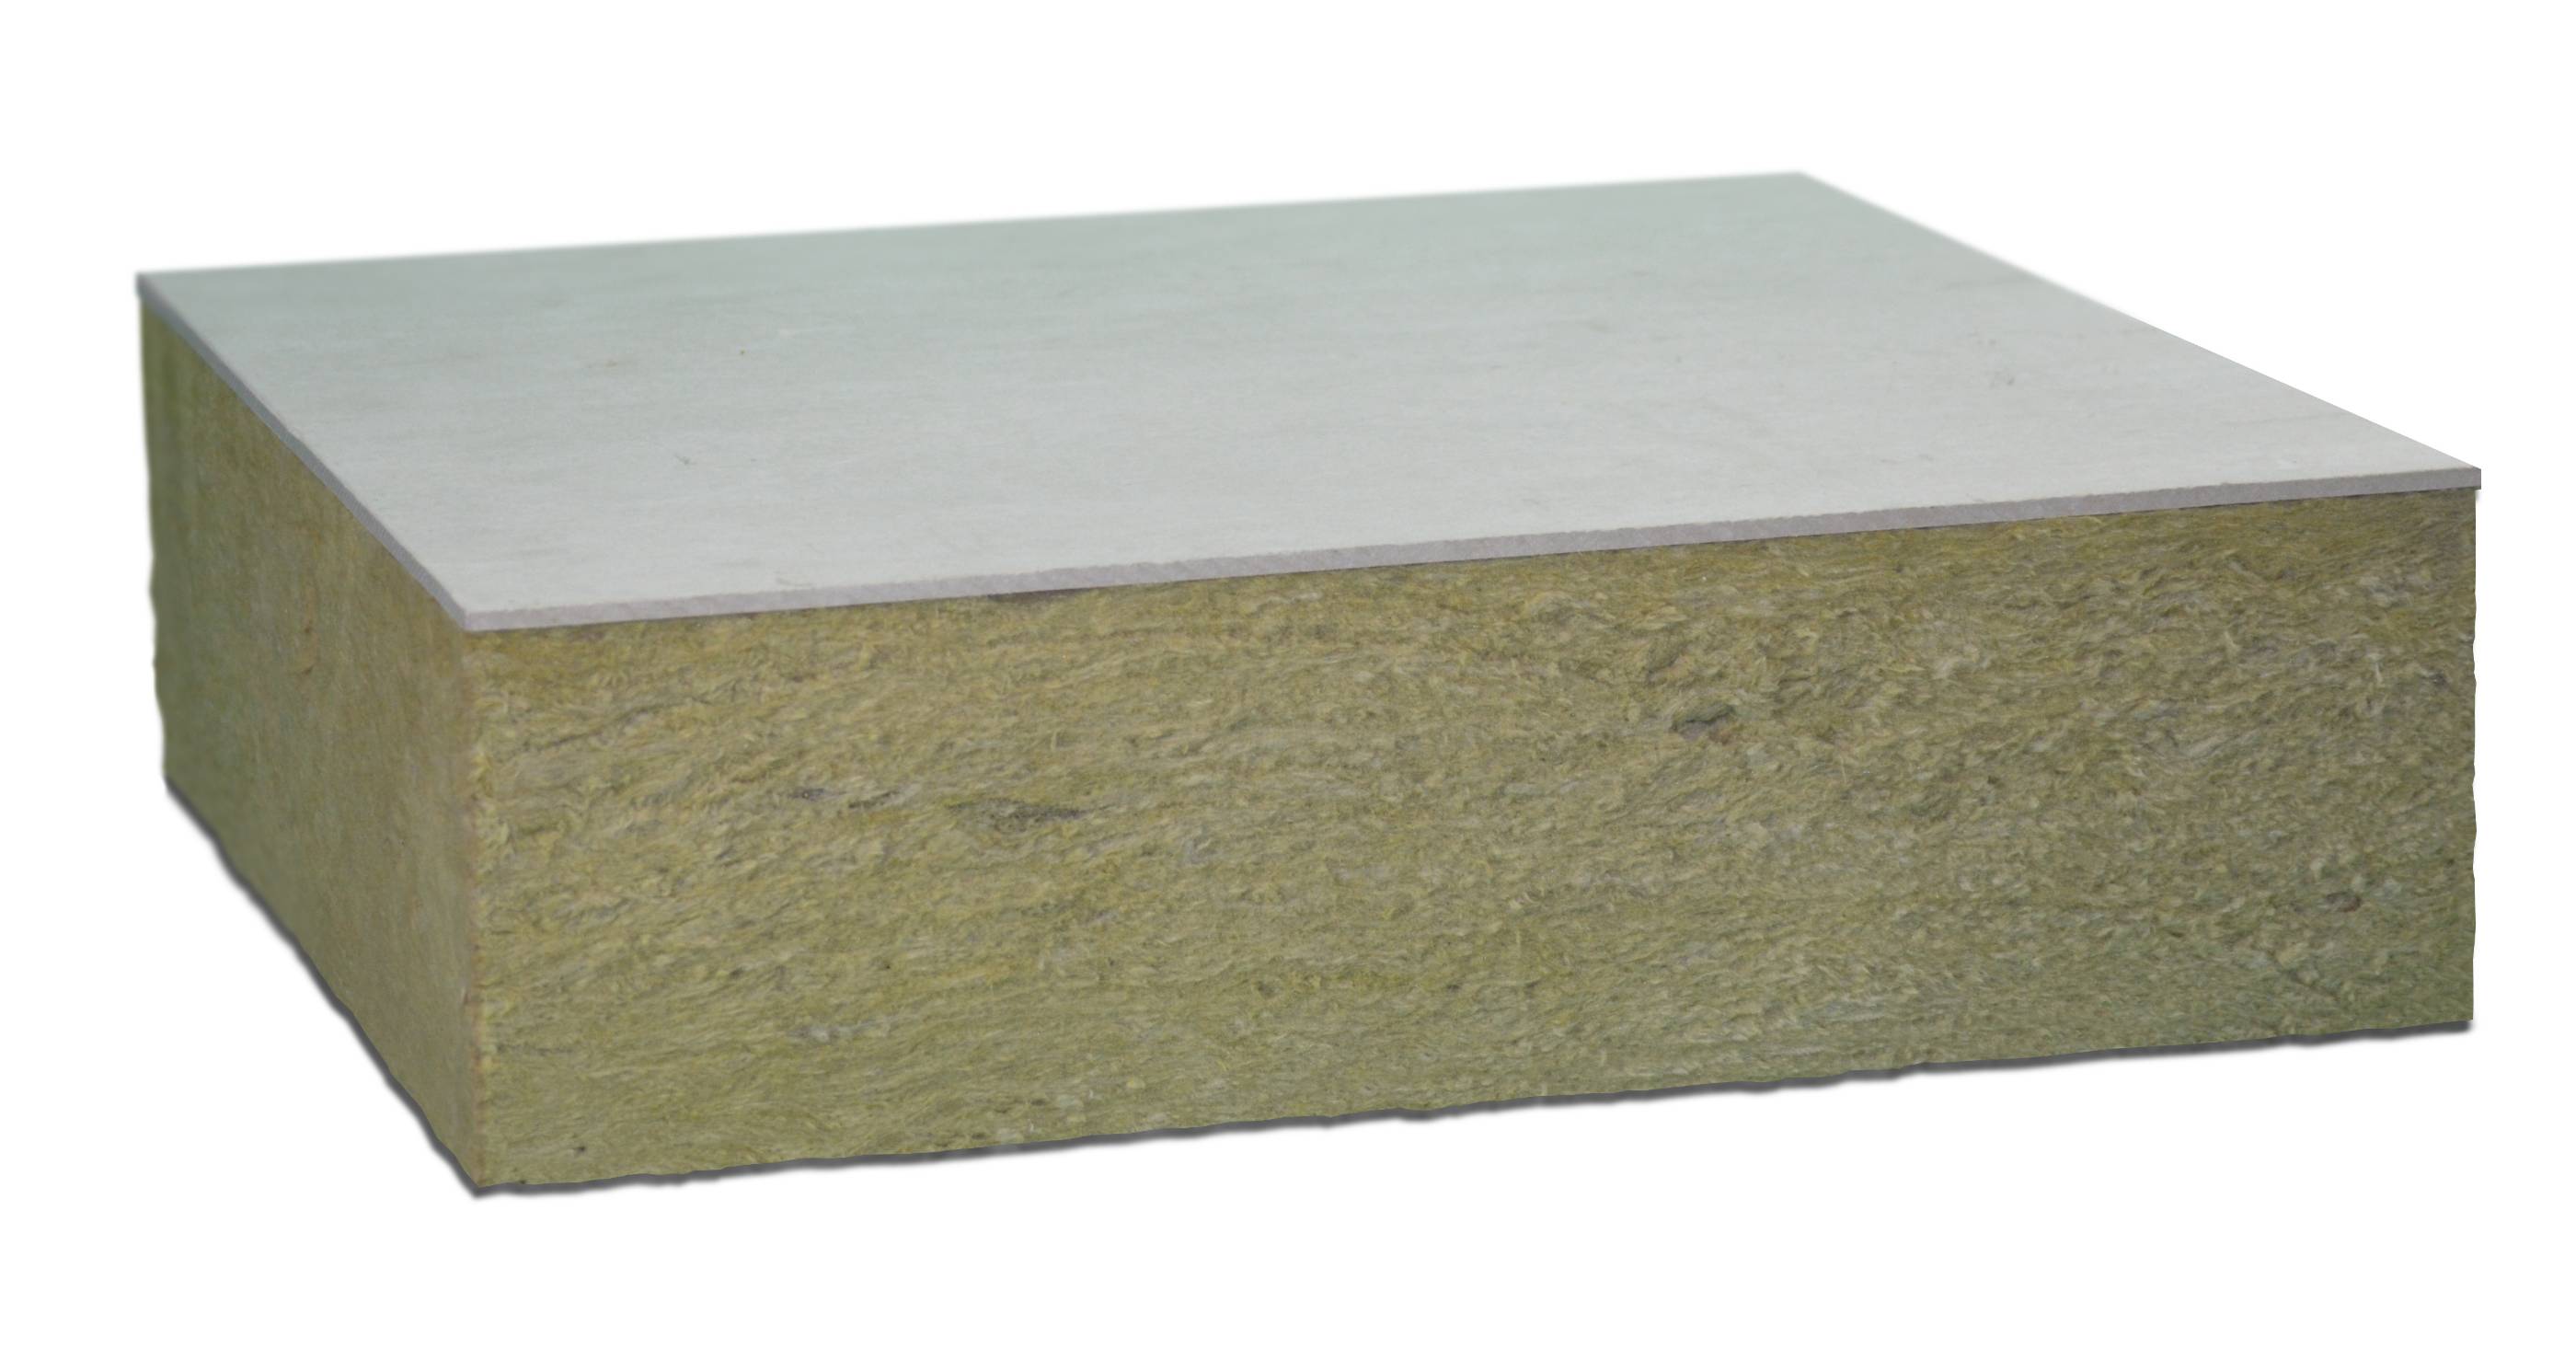 High Impact Soffit Liner Boards - Thermal insulation